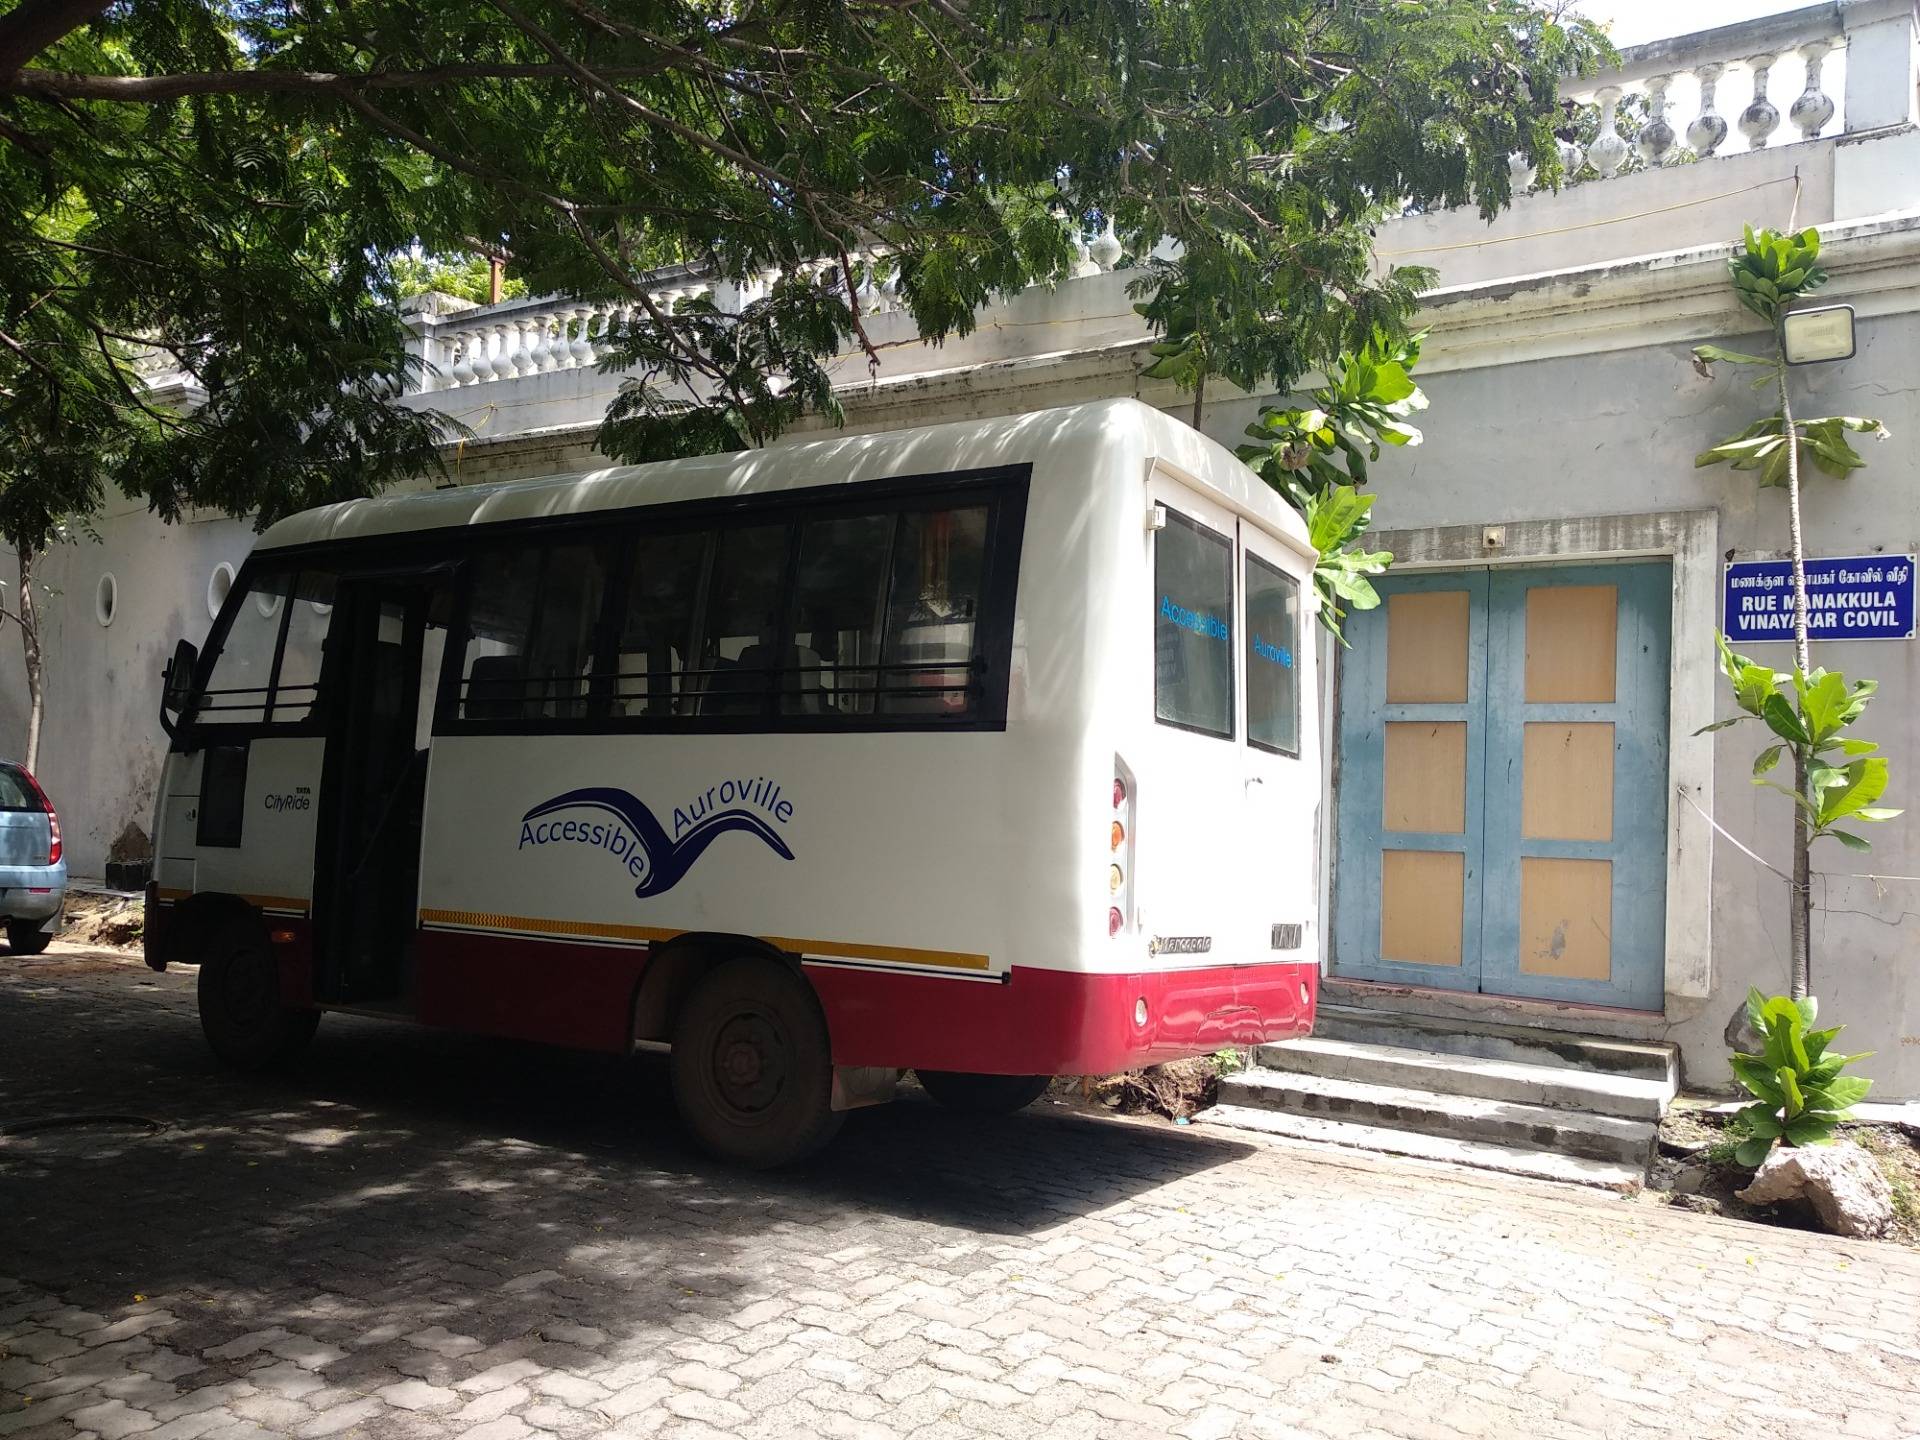 (The accessible Auroville bus)